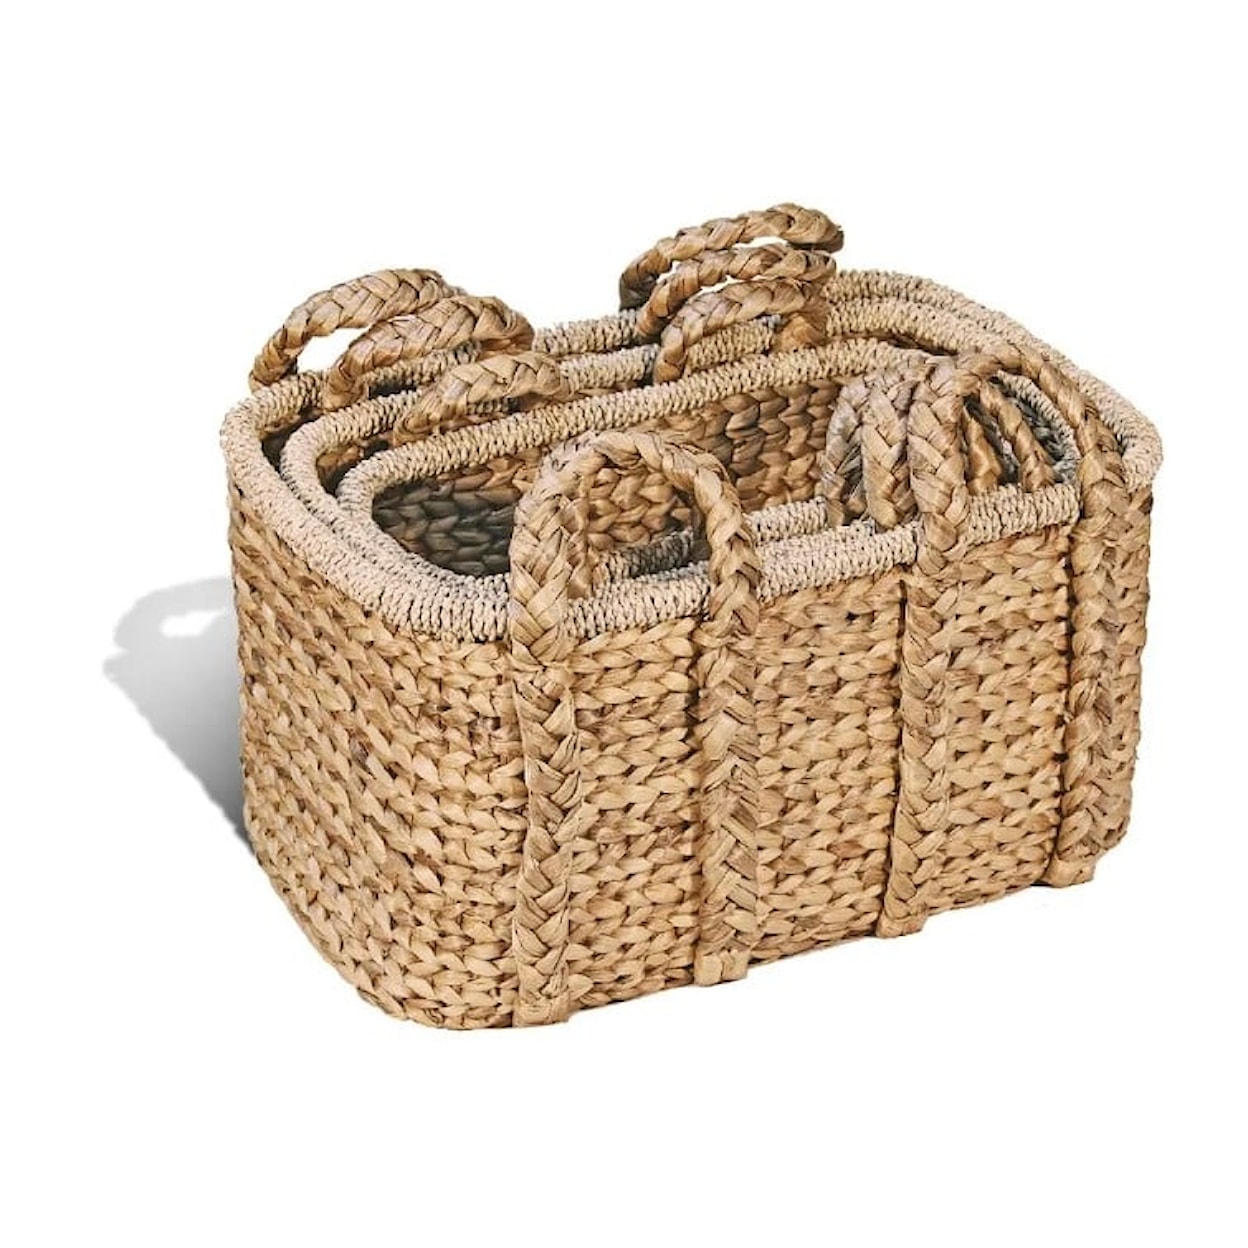 Ibolili Baskets and Sets WOVEN WATER HYACINTH BASKET, RECT- S/3